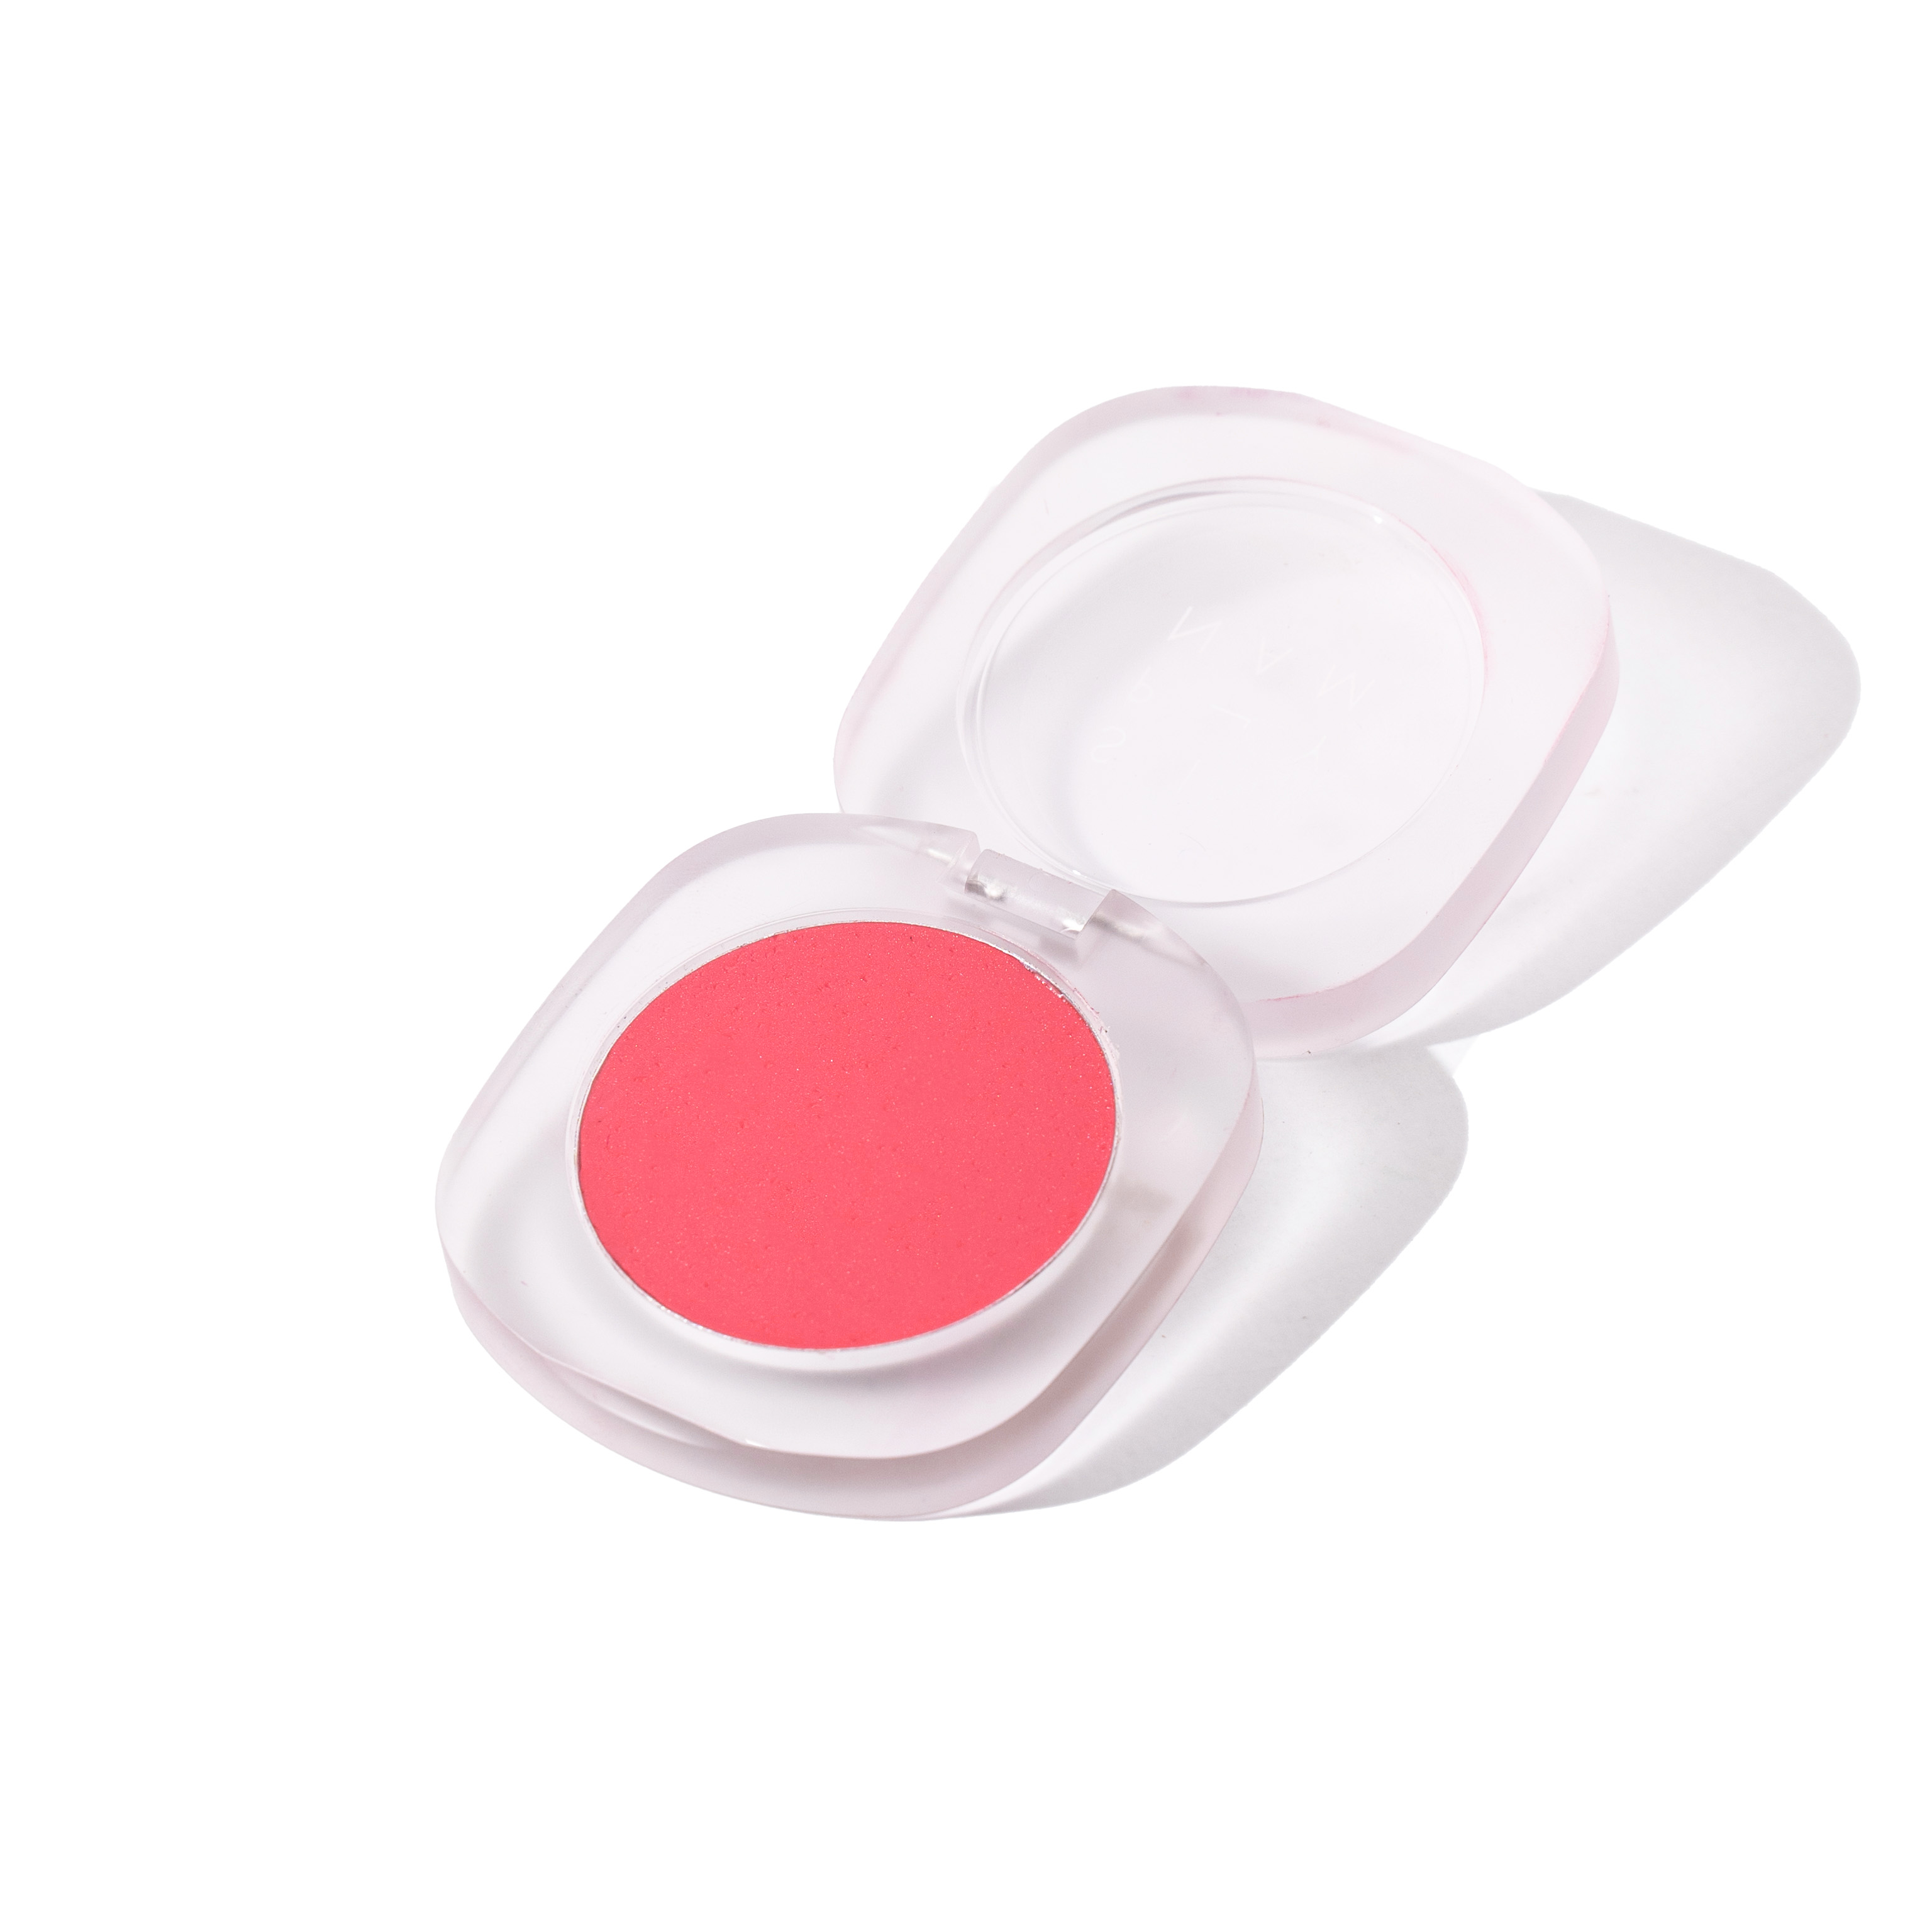 Two Peas in a Pod - Coral Pink Velvet Cream Magic Blush